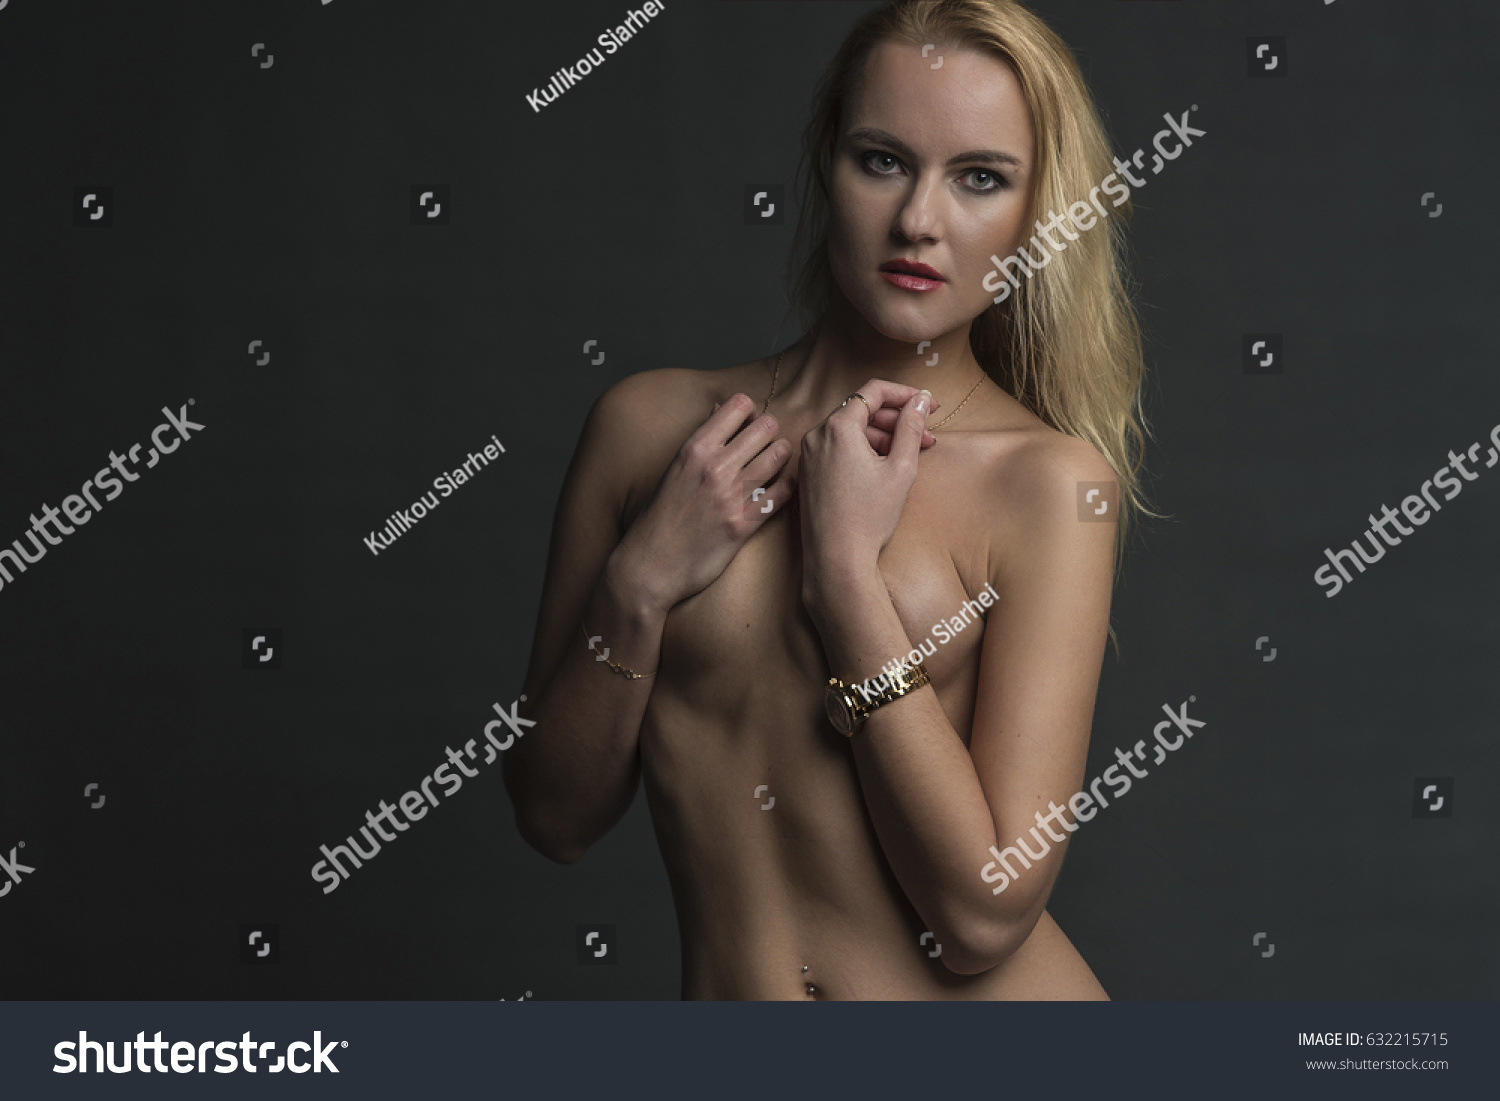 Blonde in blue jeans covers her bare chest with her hands #632215715